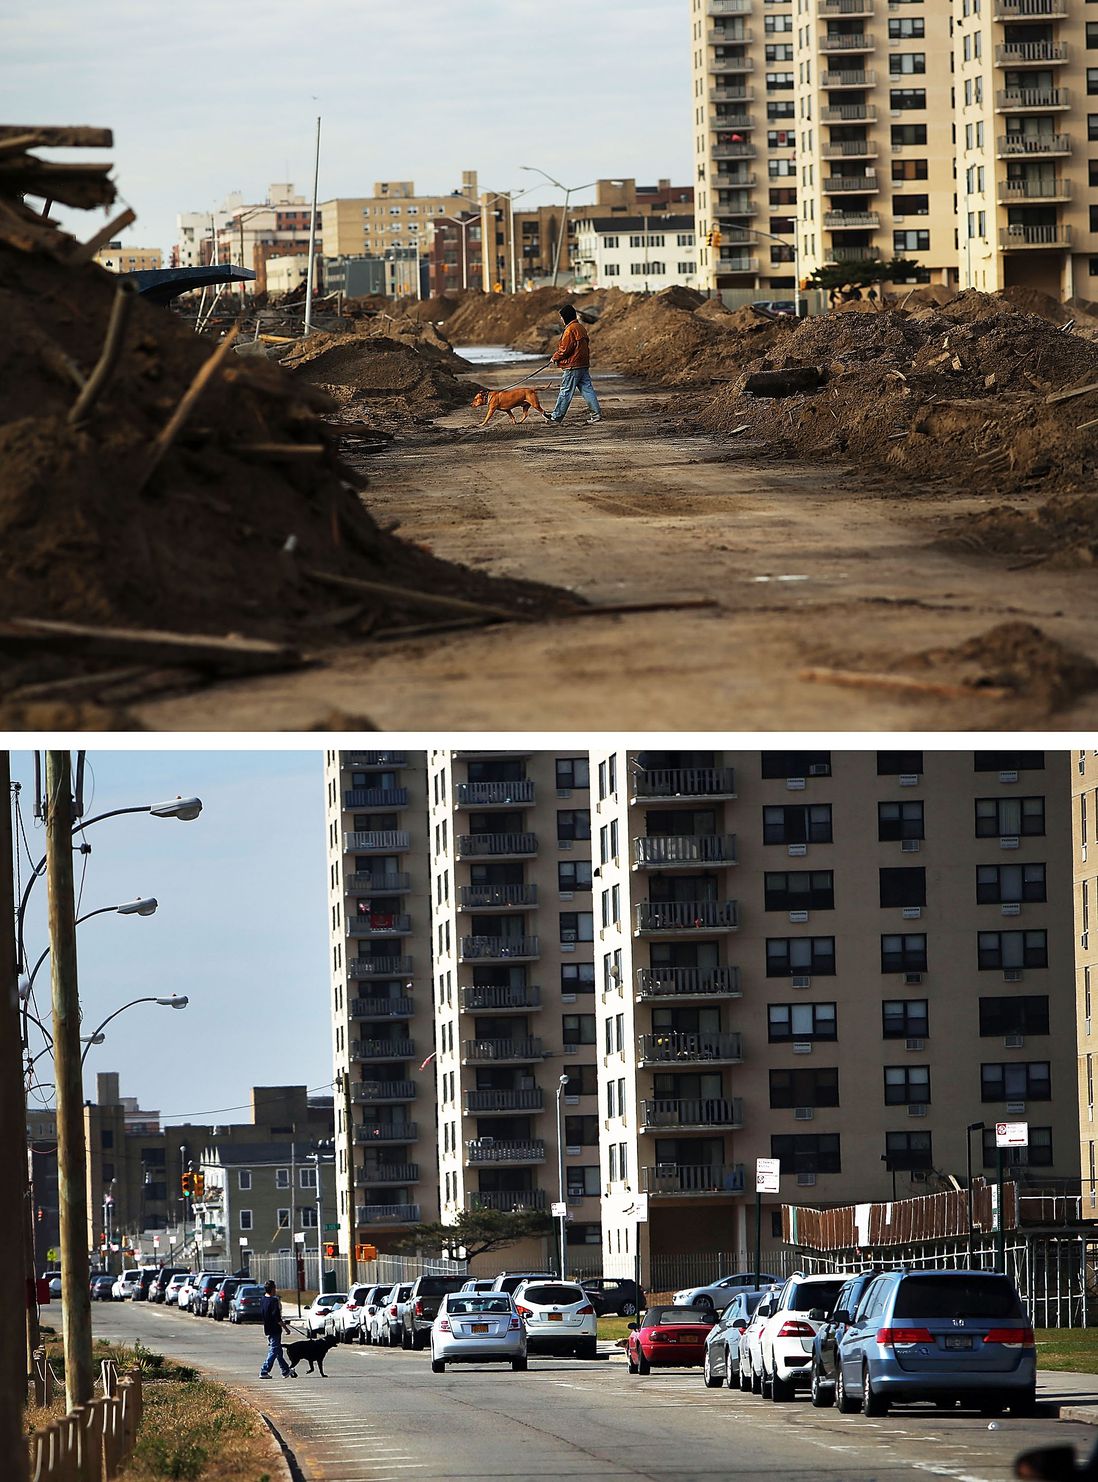 [Top] A man walks a dog through a heavily damaged section on November 2, 2012 in the Rockaway neighborhood of the Queens borough of New York City. [Bottom] A person walks a dog on October 23, 2013.